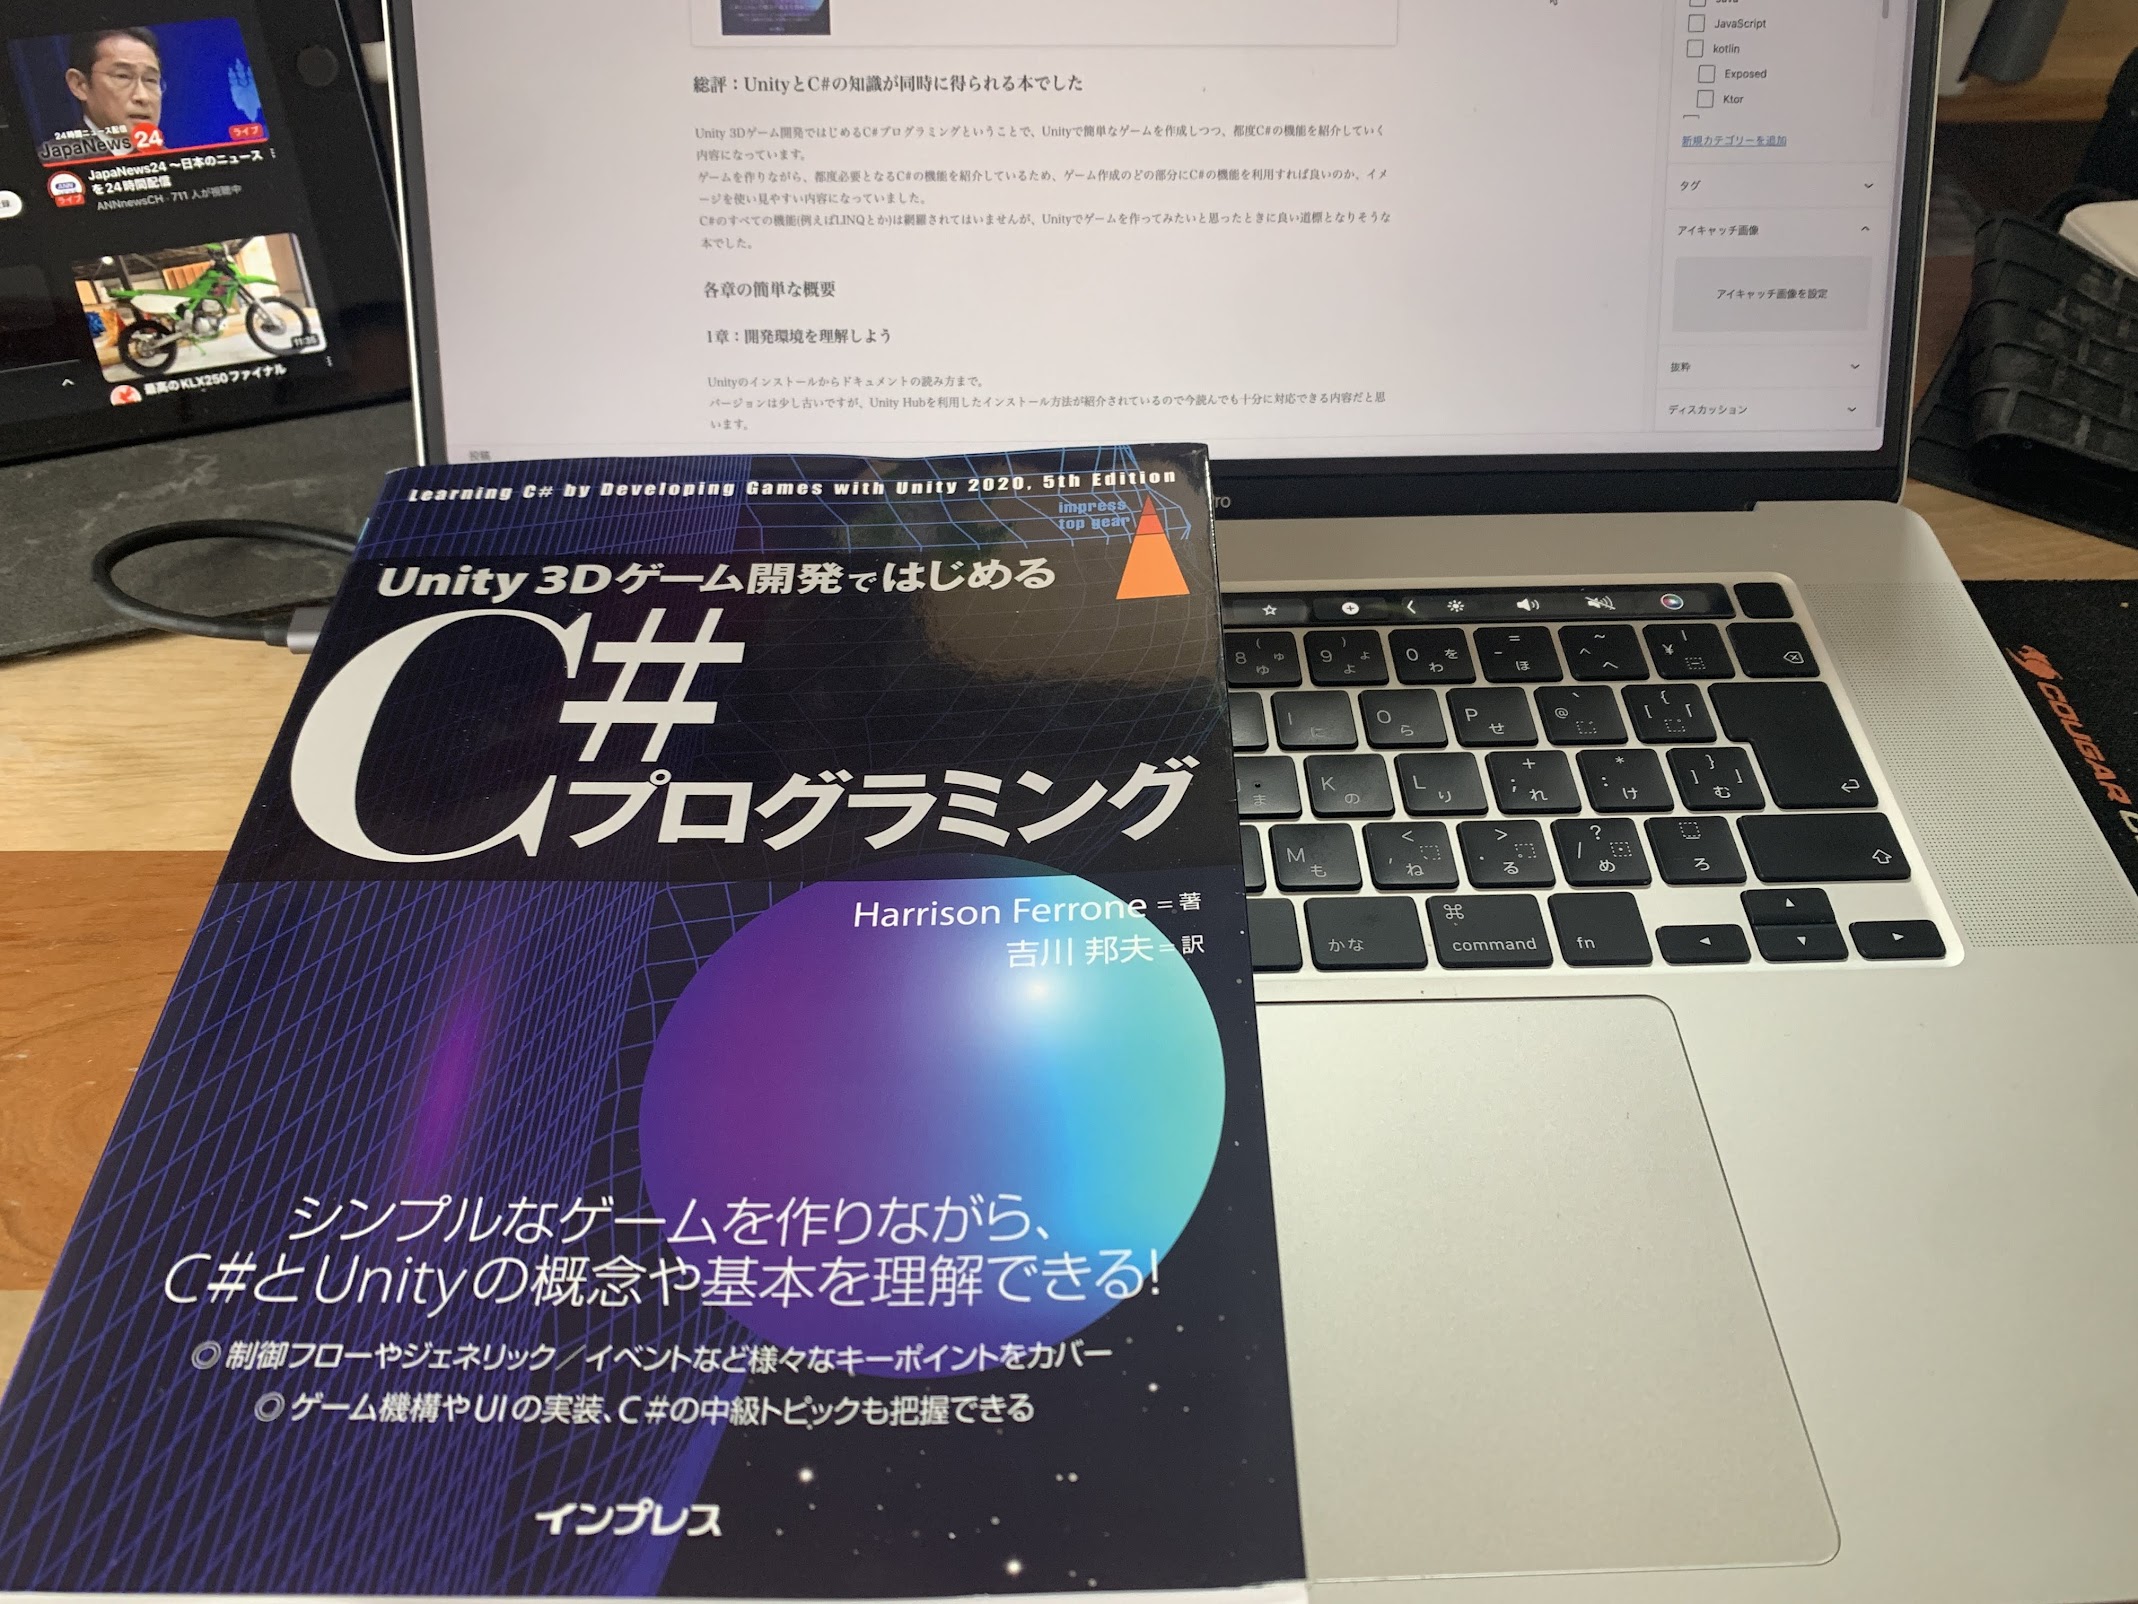 You are currently viewing Unity 3Dゲーム開発ではじめるC#プログラミング